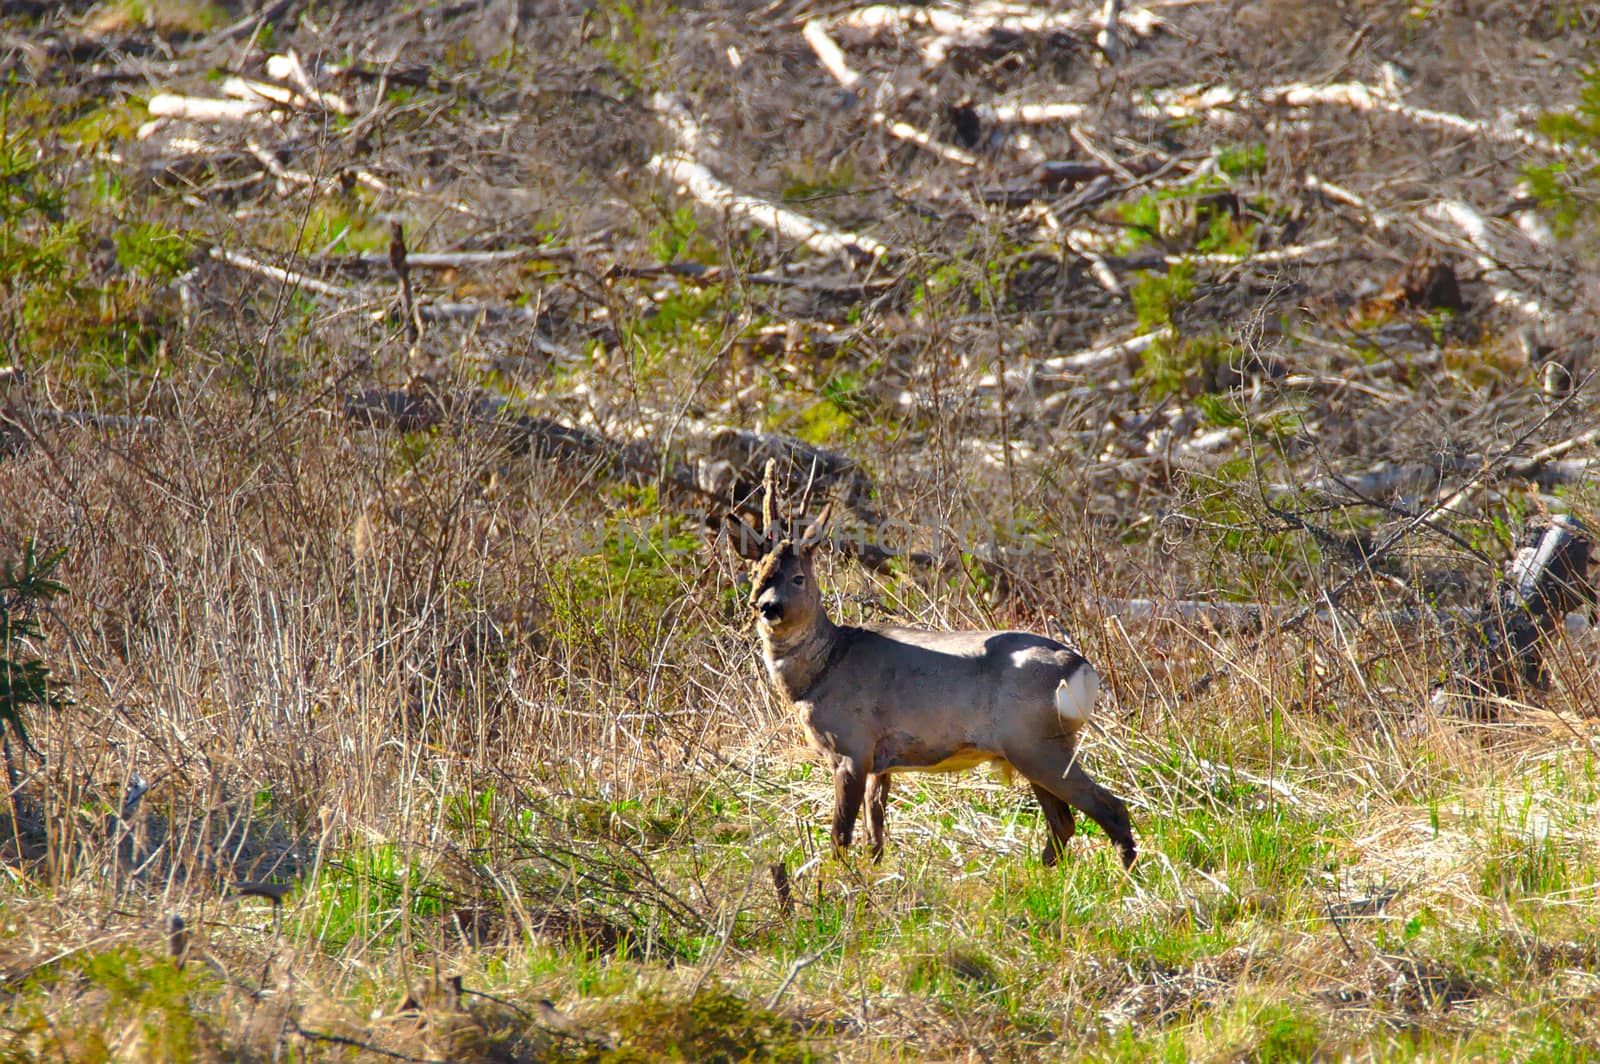 A roe deer standing and looking around at the edge of the forest